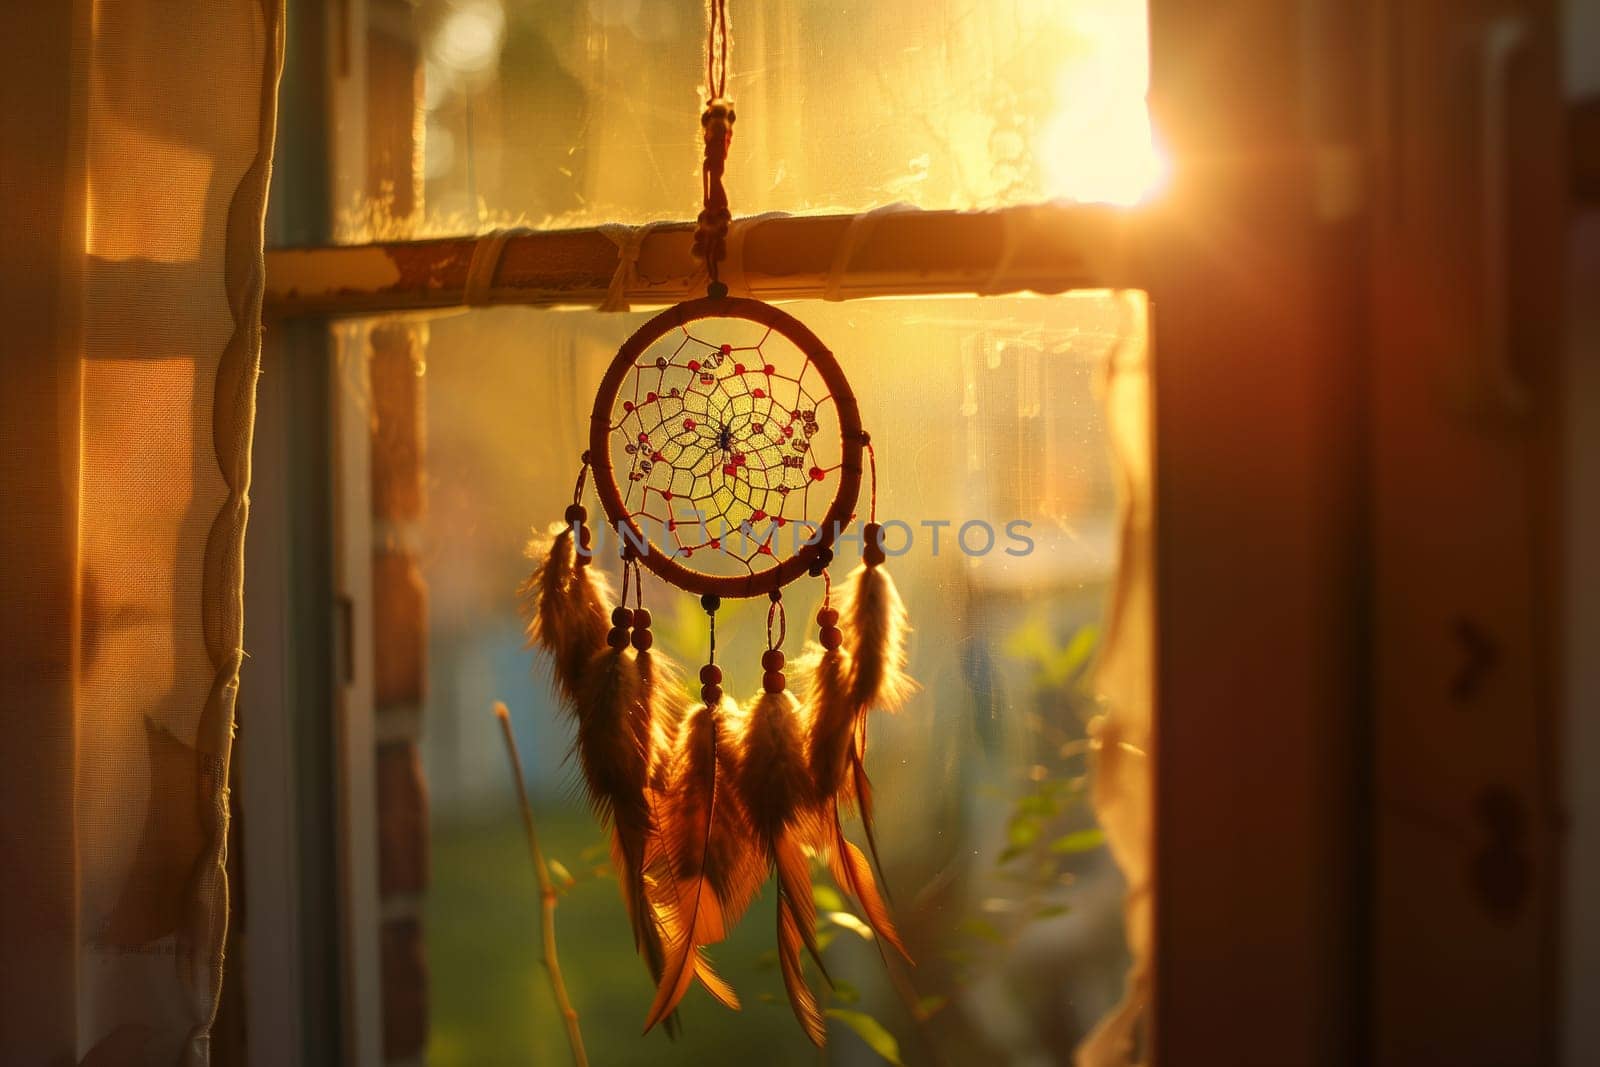 An Amber dream catcher made of Wood and Metal, with Glass tints and shades hanging from a ceiling light fixture. The sunlight shines through the Circle creating an artistic Font display